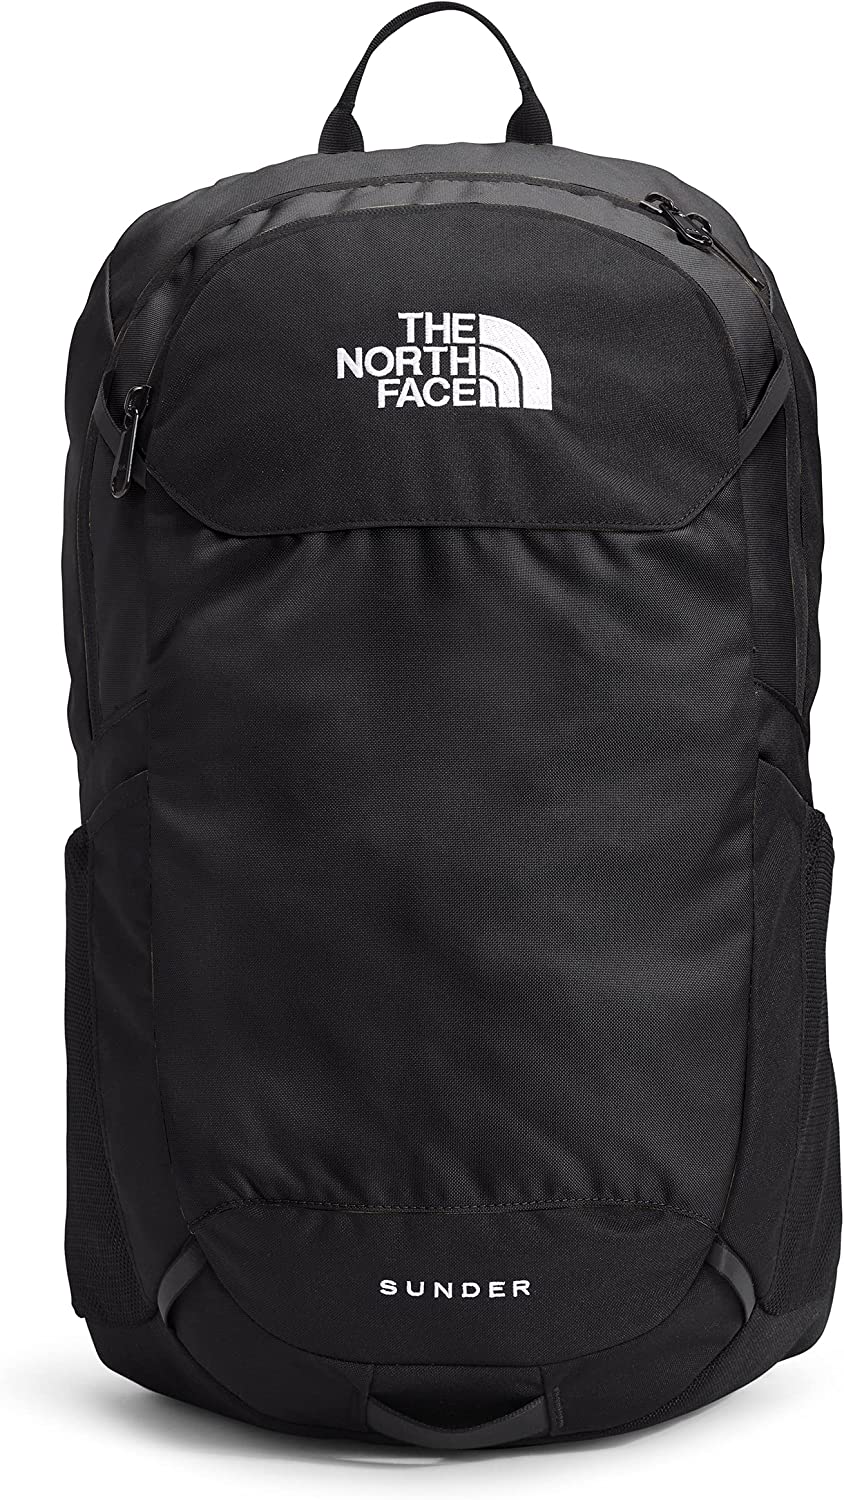 THE NORTH FACE Sunder Commuter Laptop Backpack, TNF [...]